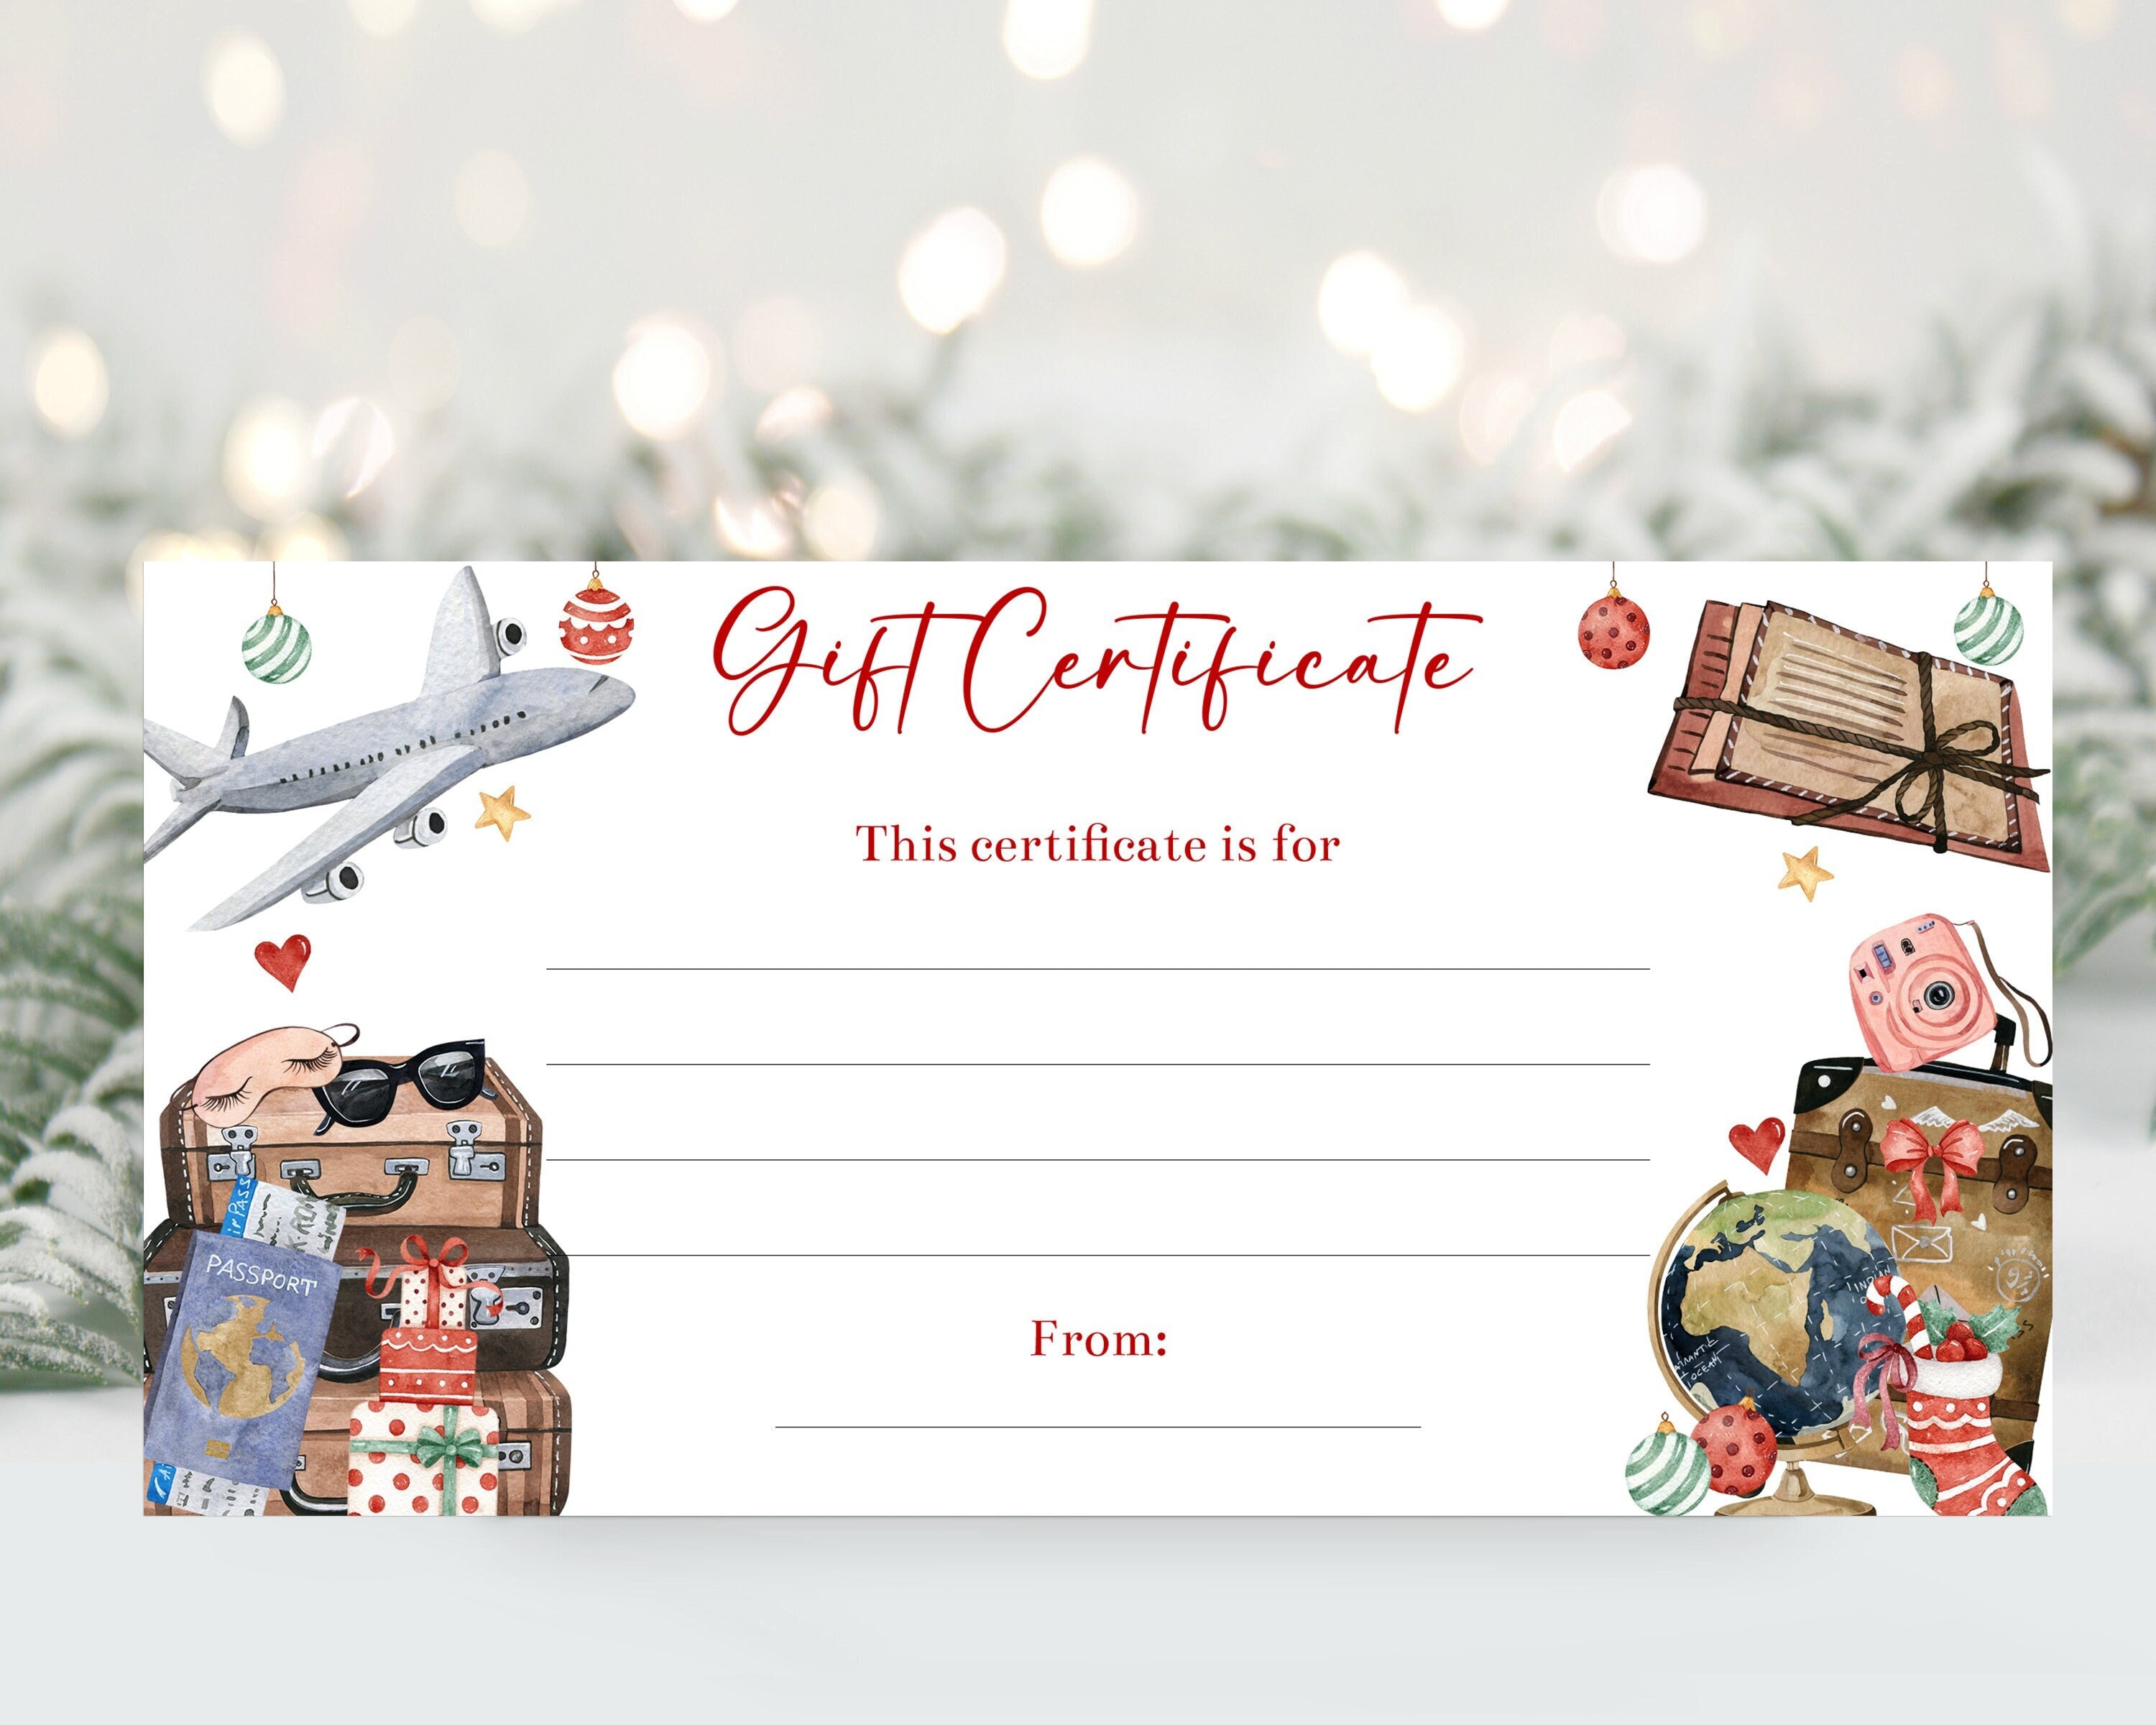 Travel Voucher with Vintage Postal Stamps on Brown Online Gift Certificate  Template - VistaCreate